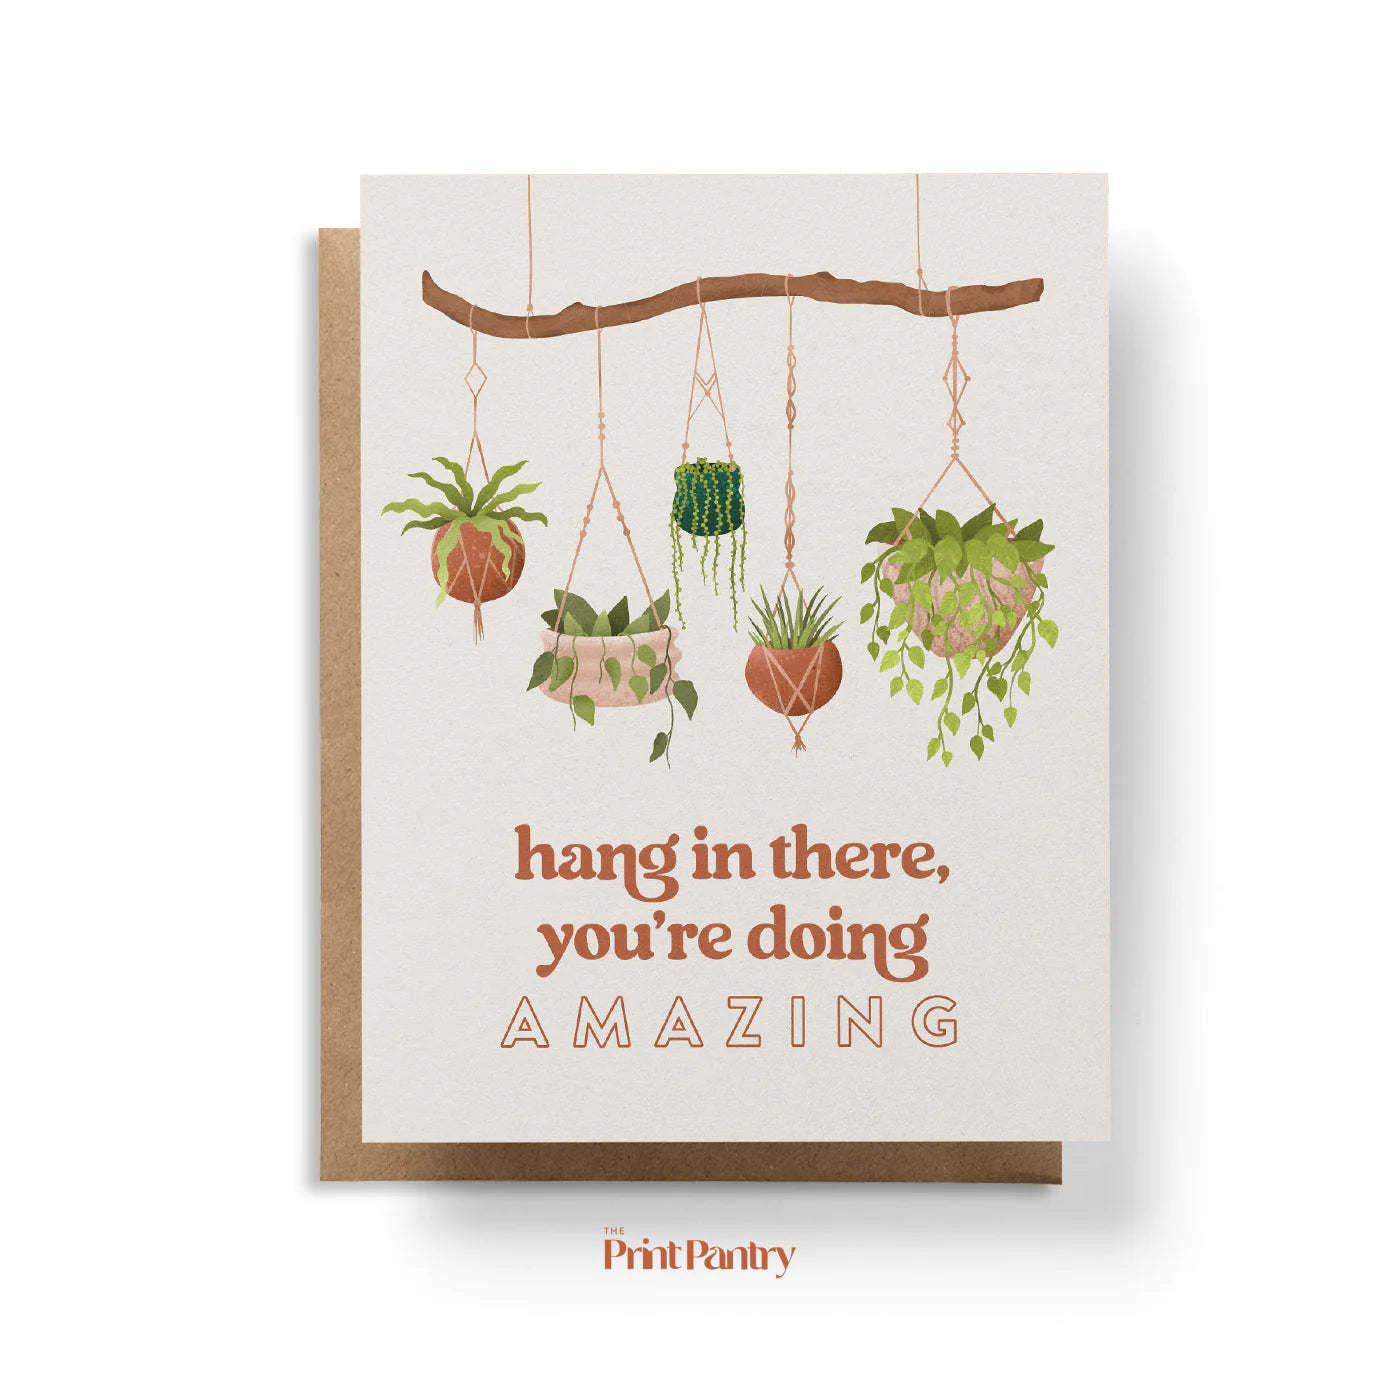 Greeting Cards - Biodegradable